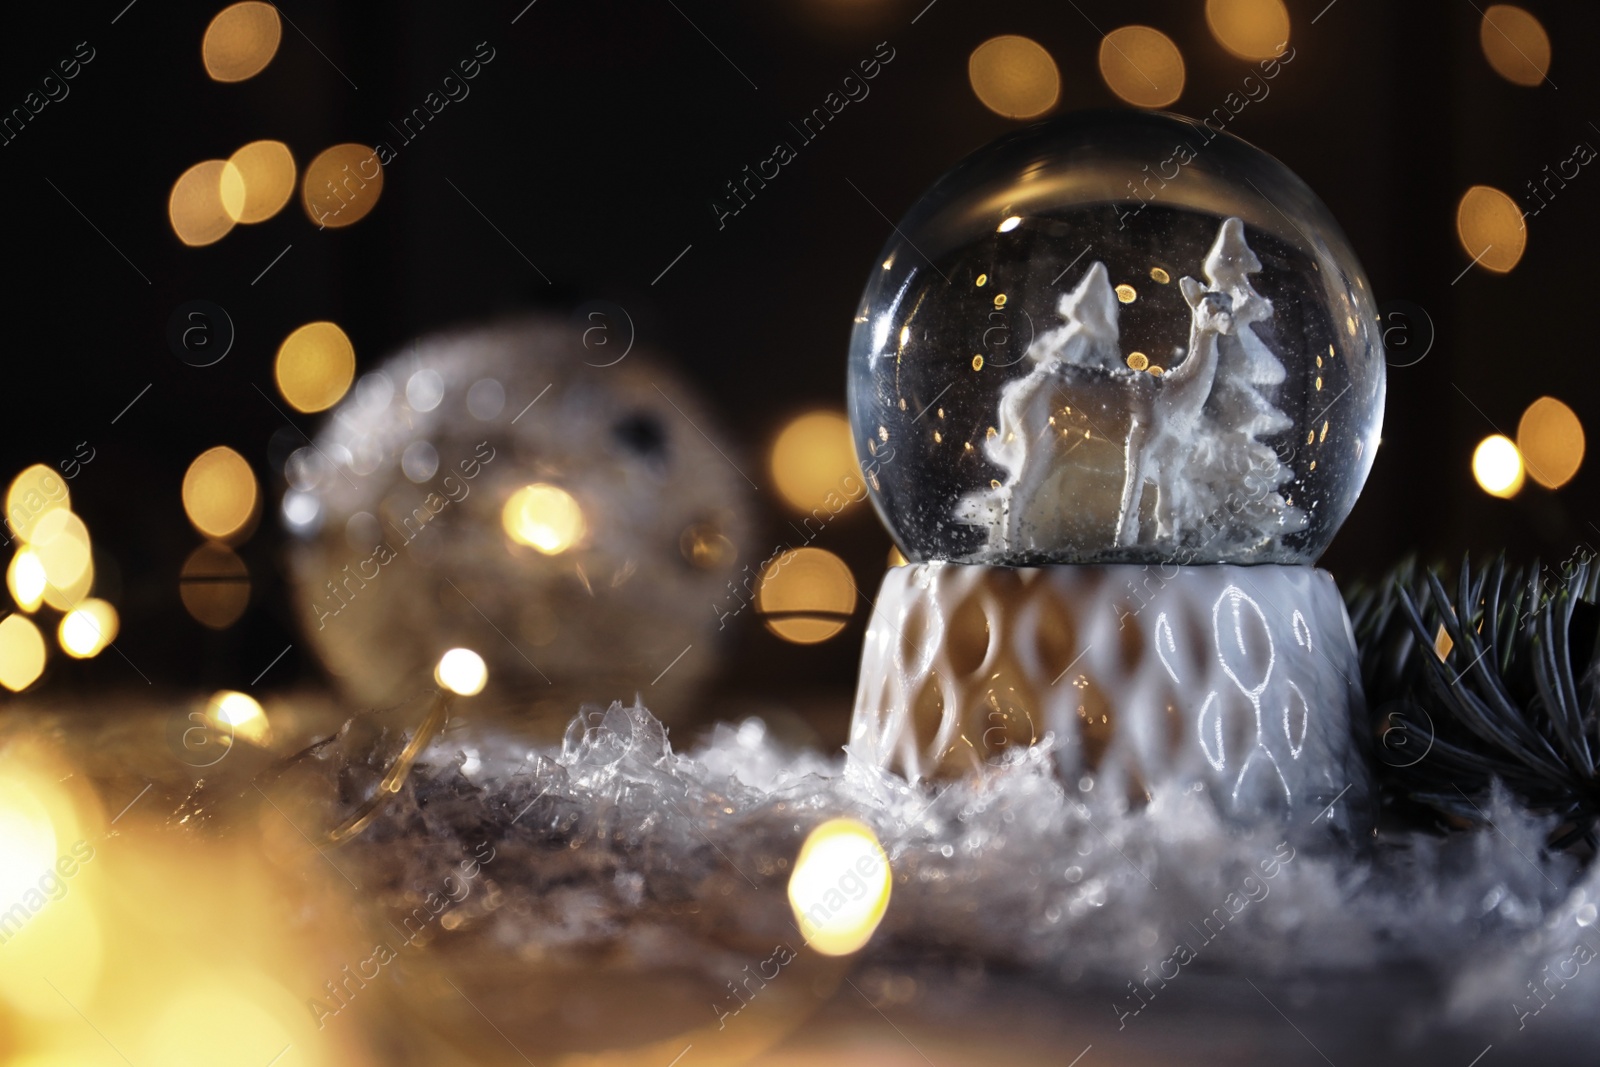 Photo of Christmas glass globe with artificial snow on table against blurred background. Space for text